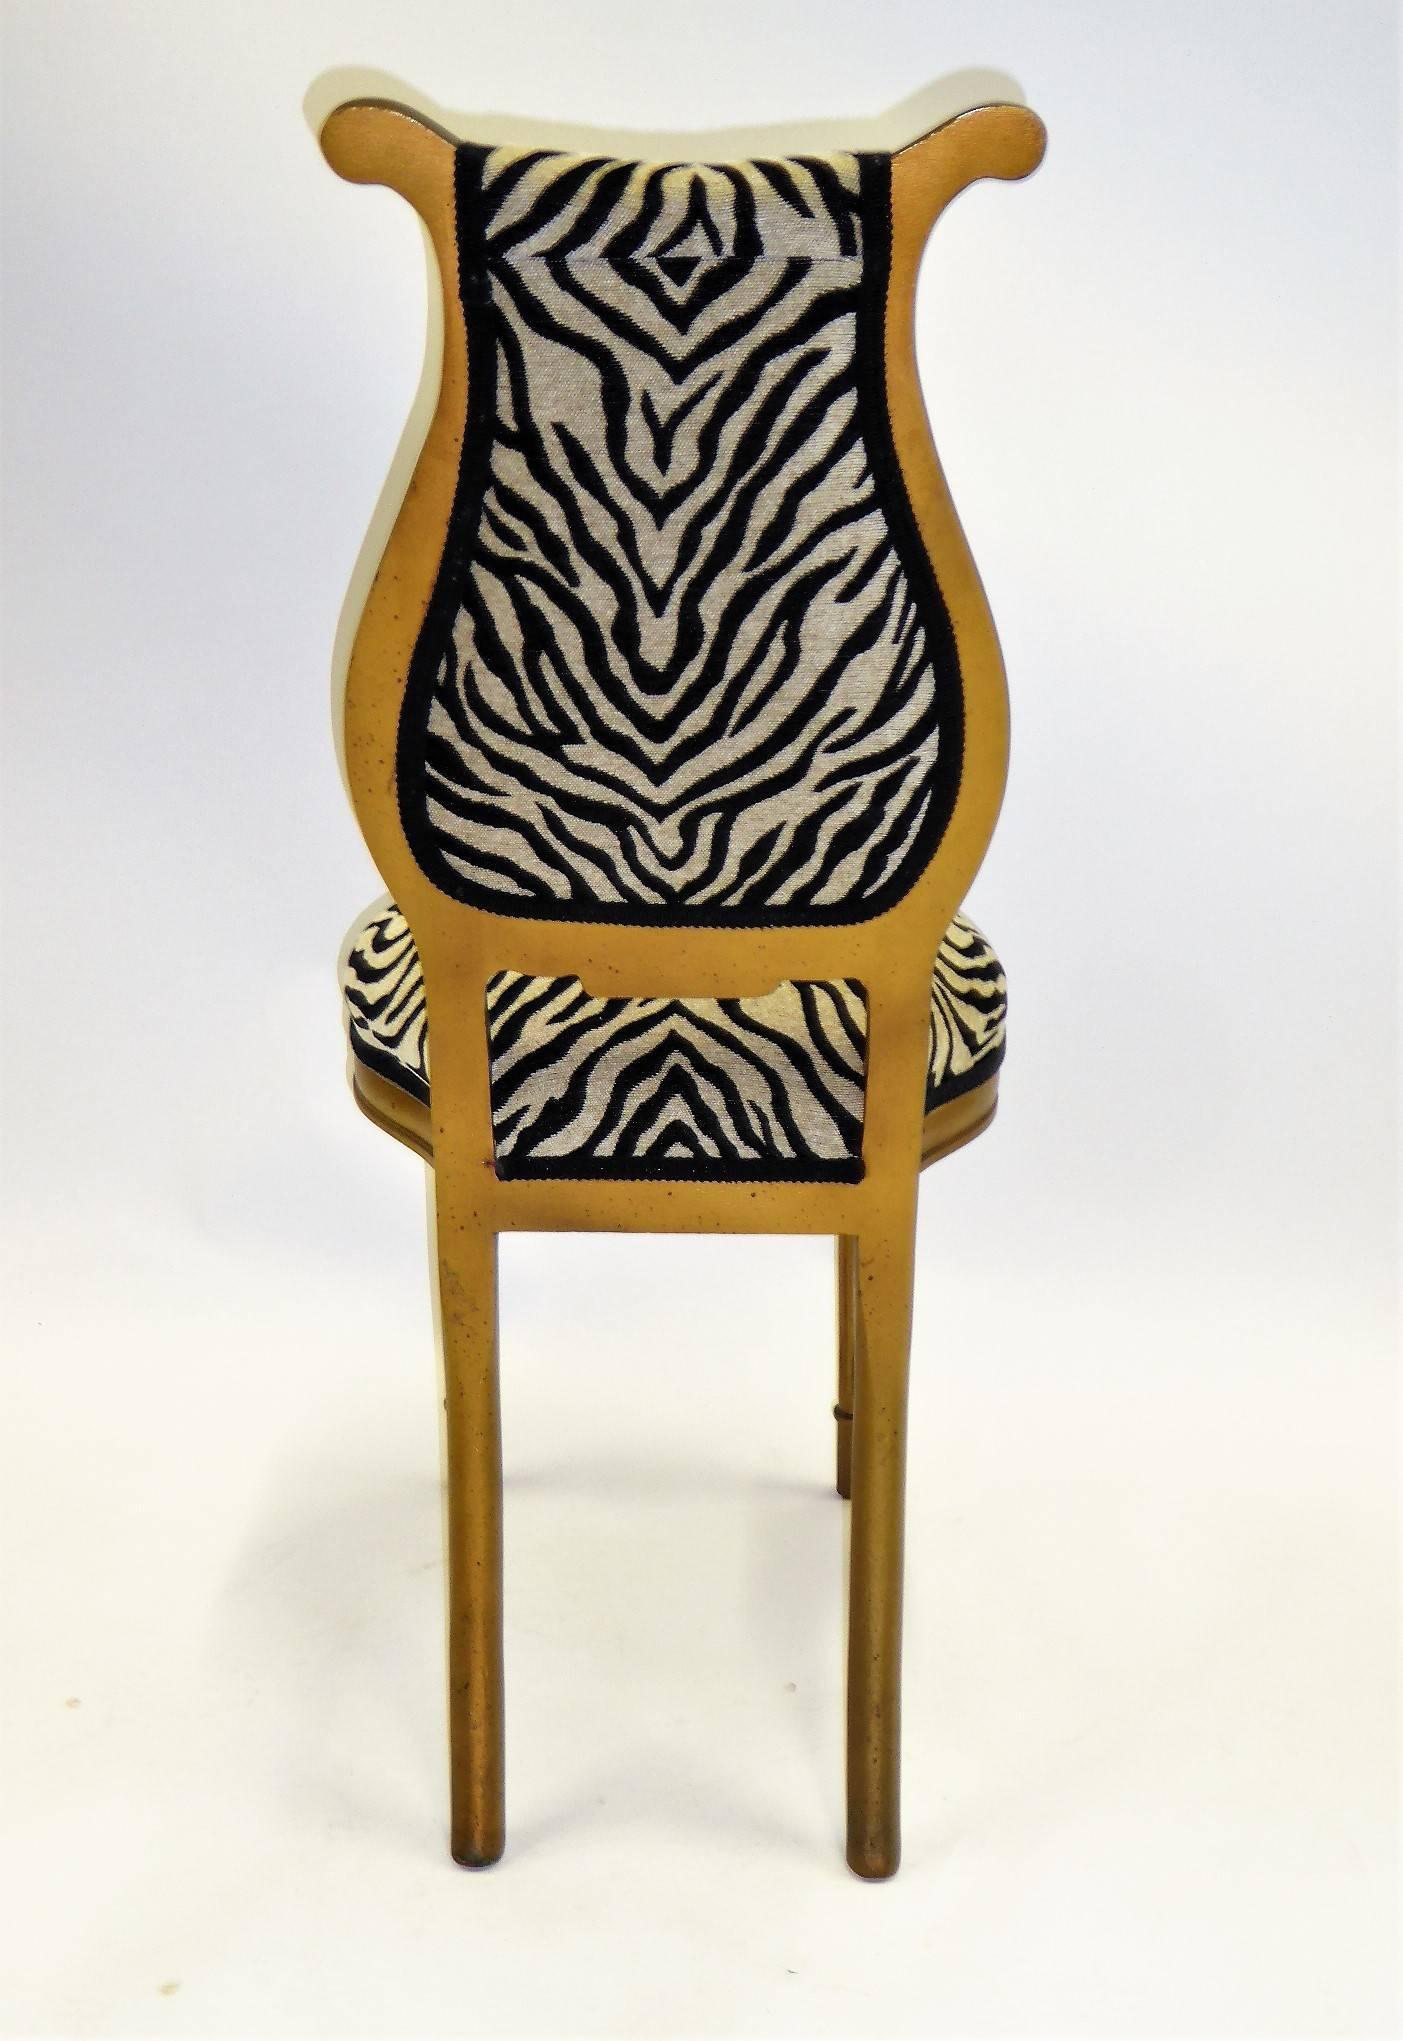 Hollywood Regency 1940s Musical Motif Carved Giltwood Side Chair in Zebra Chenille